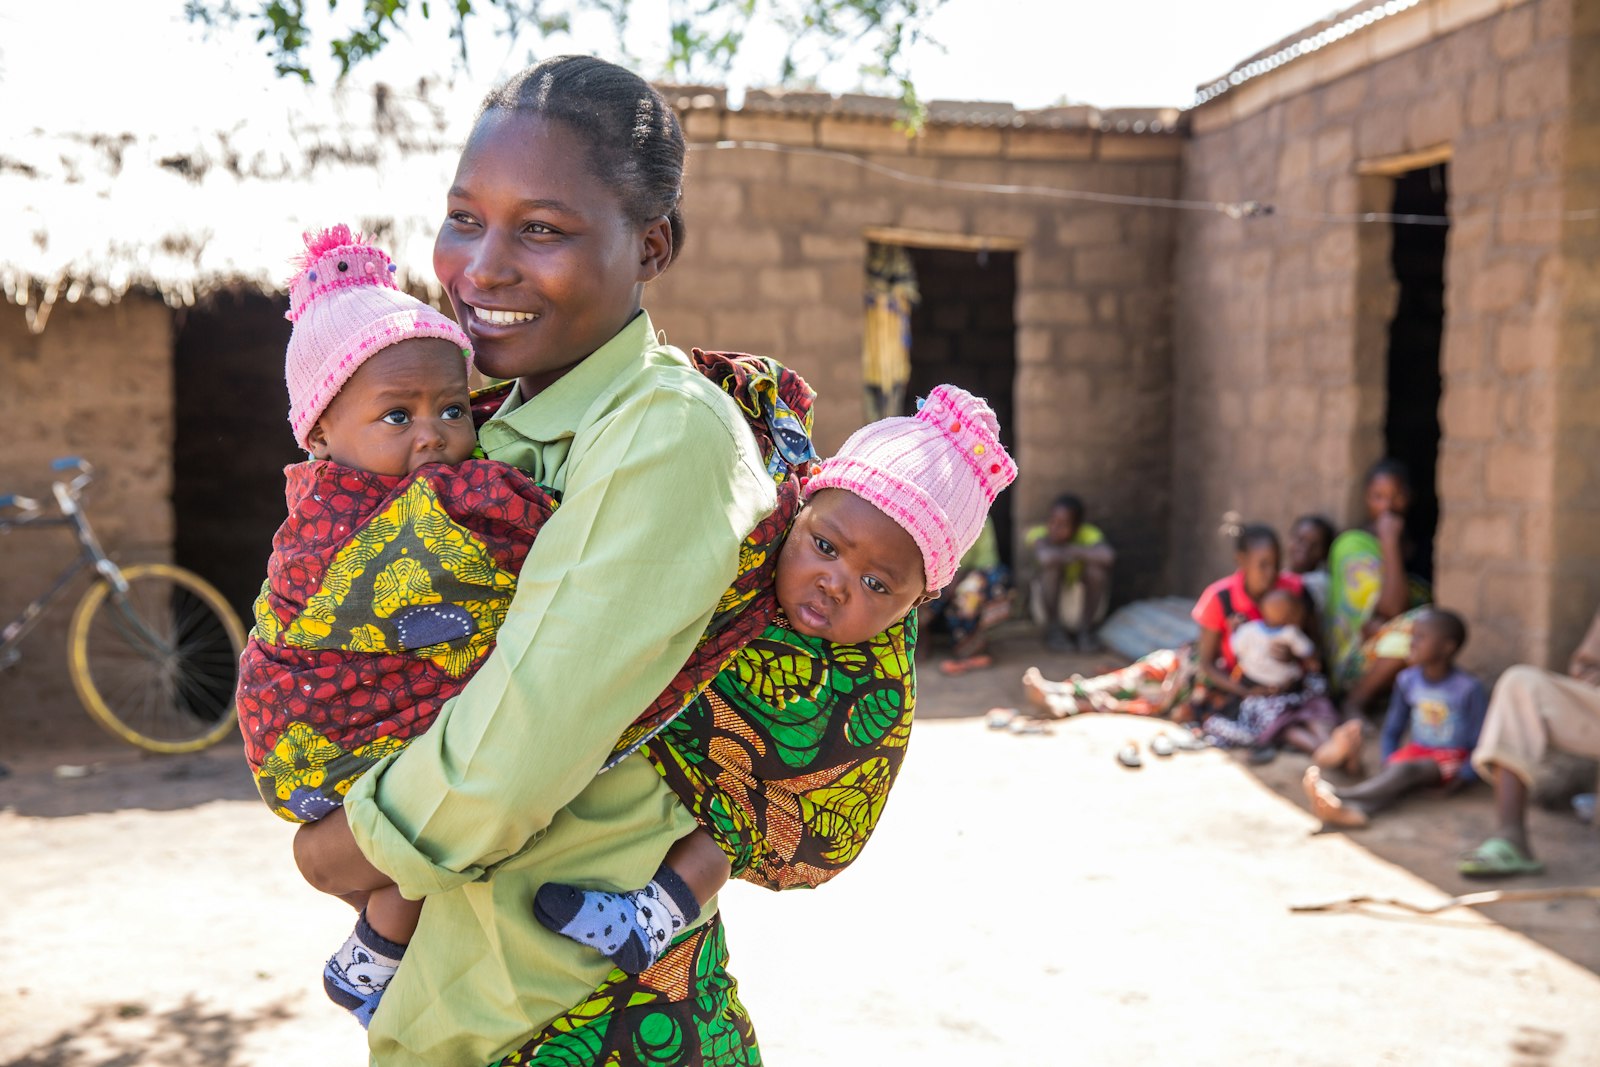 Reducing maternal deaths by connecting women to emergency care